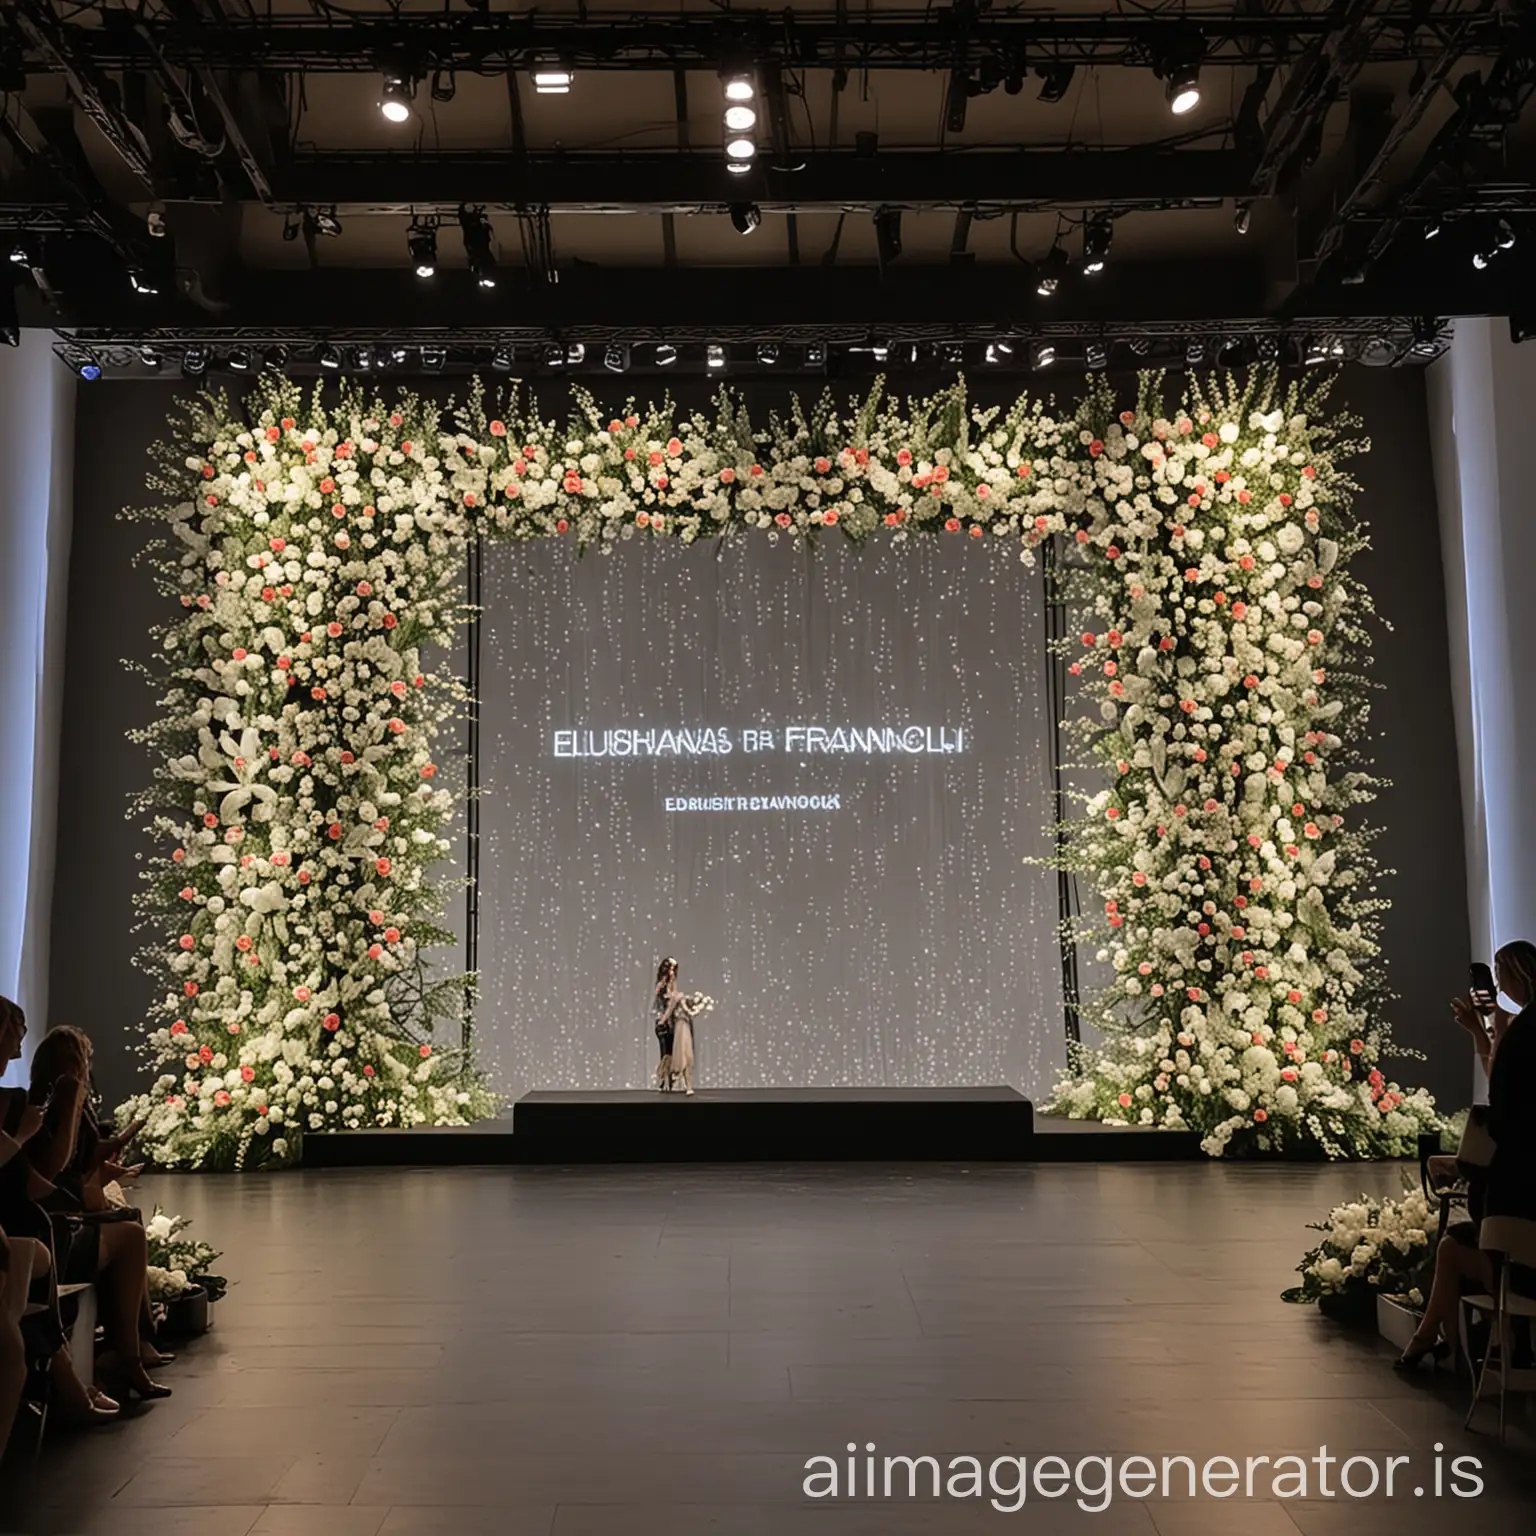 Fashion-Show-LED-Wall-with-Elisabetta-Franchi-Models-and-Floral-Runway